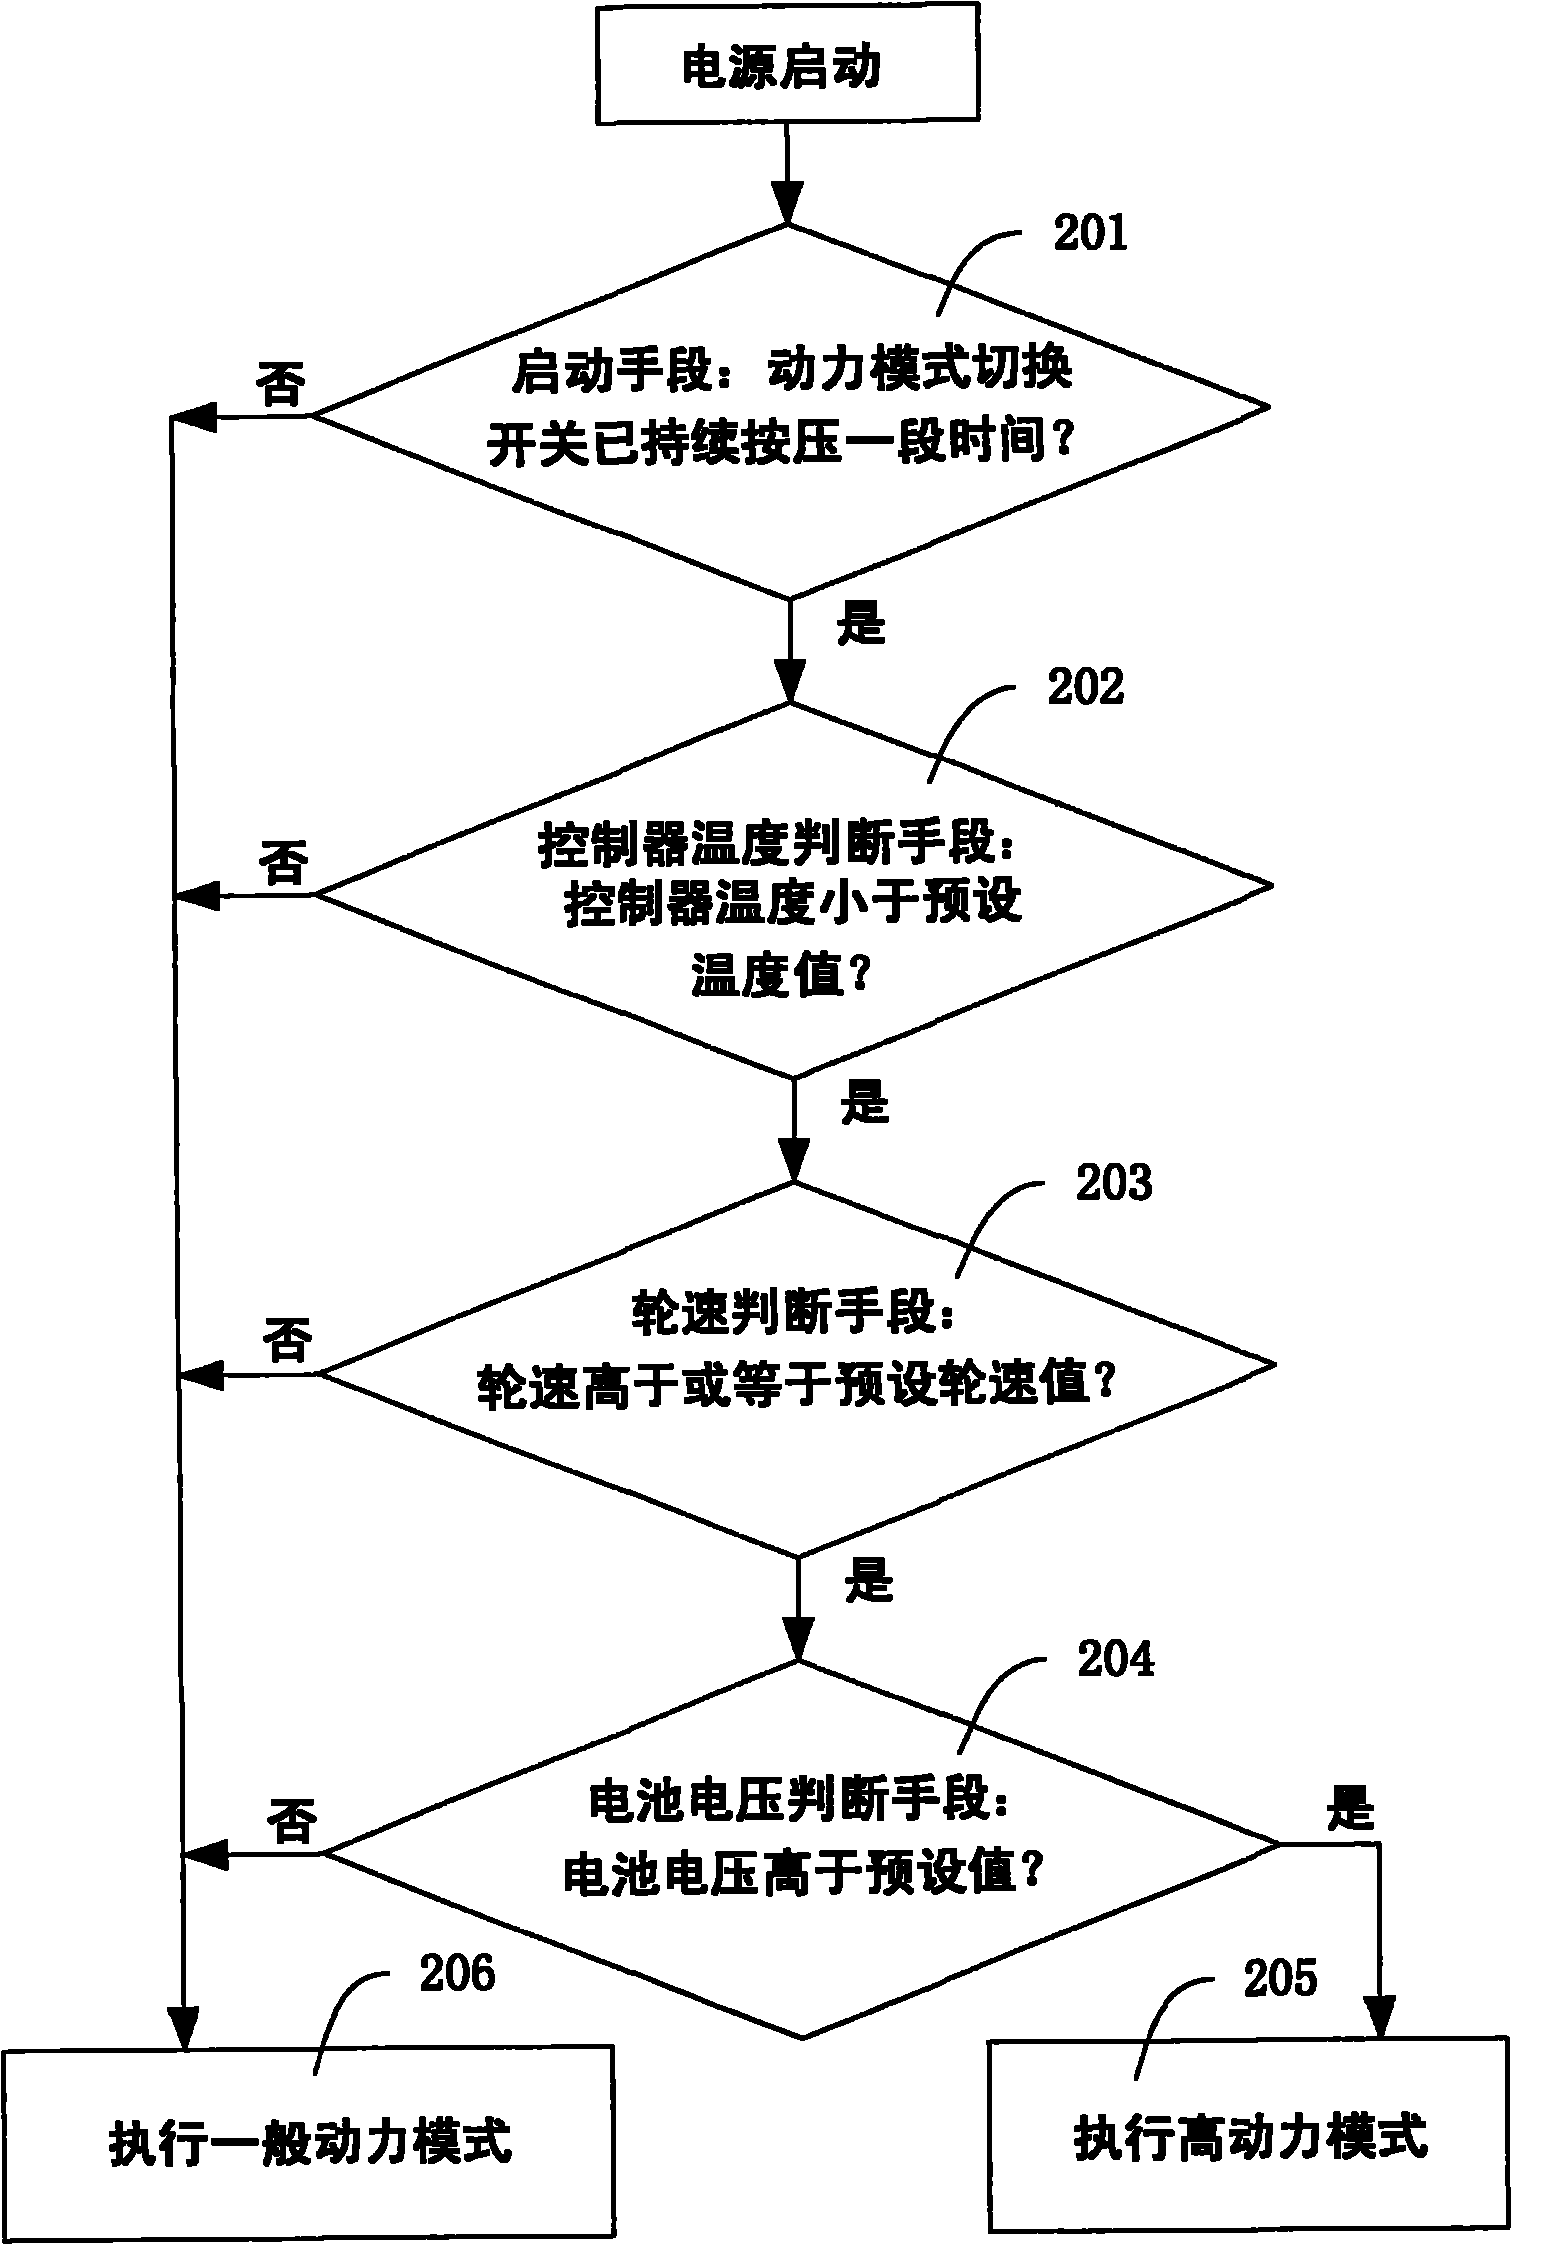 Method and device for switching power mode of electric vehicle